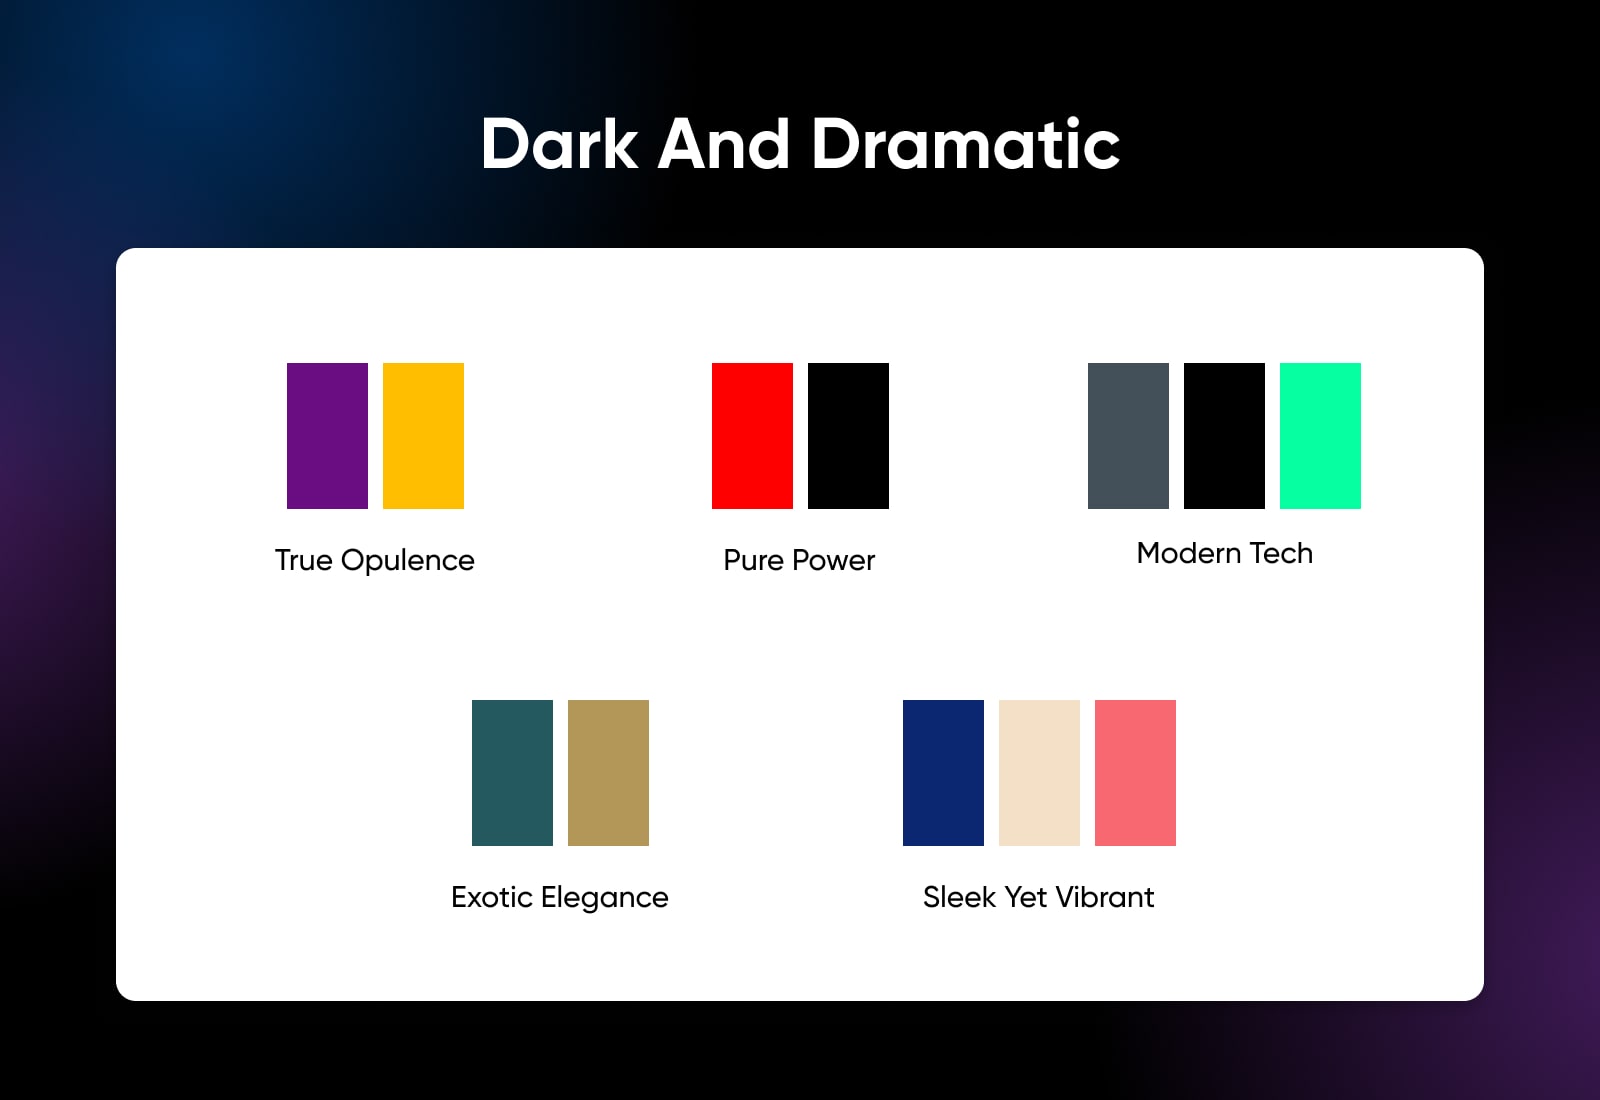 dark and dramatic color schedule like exotic elegance showing dark teal and gold combos